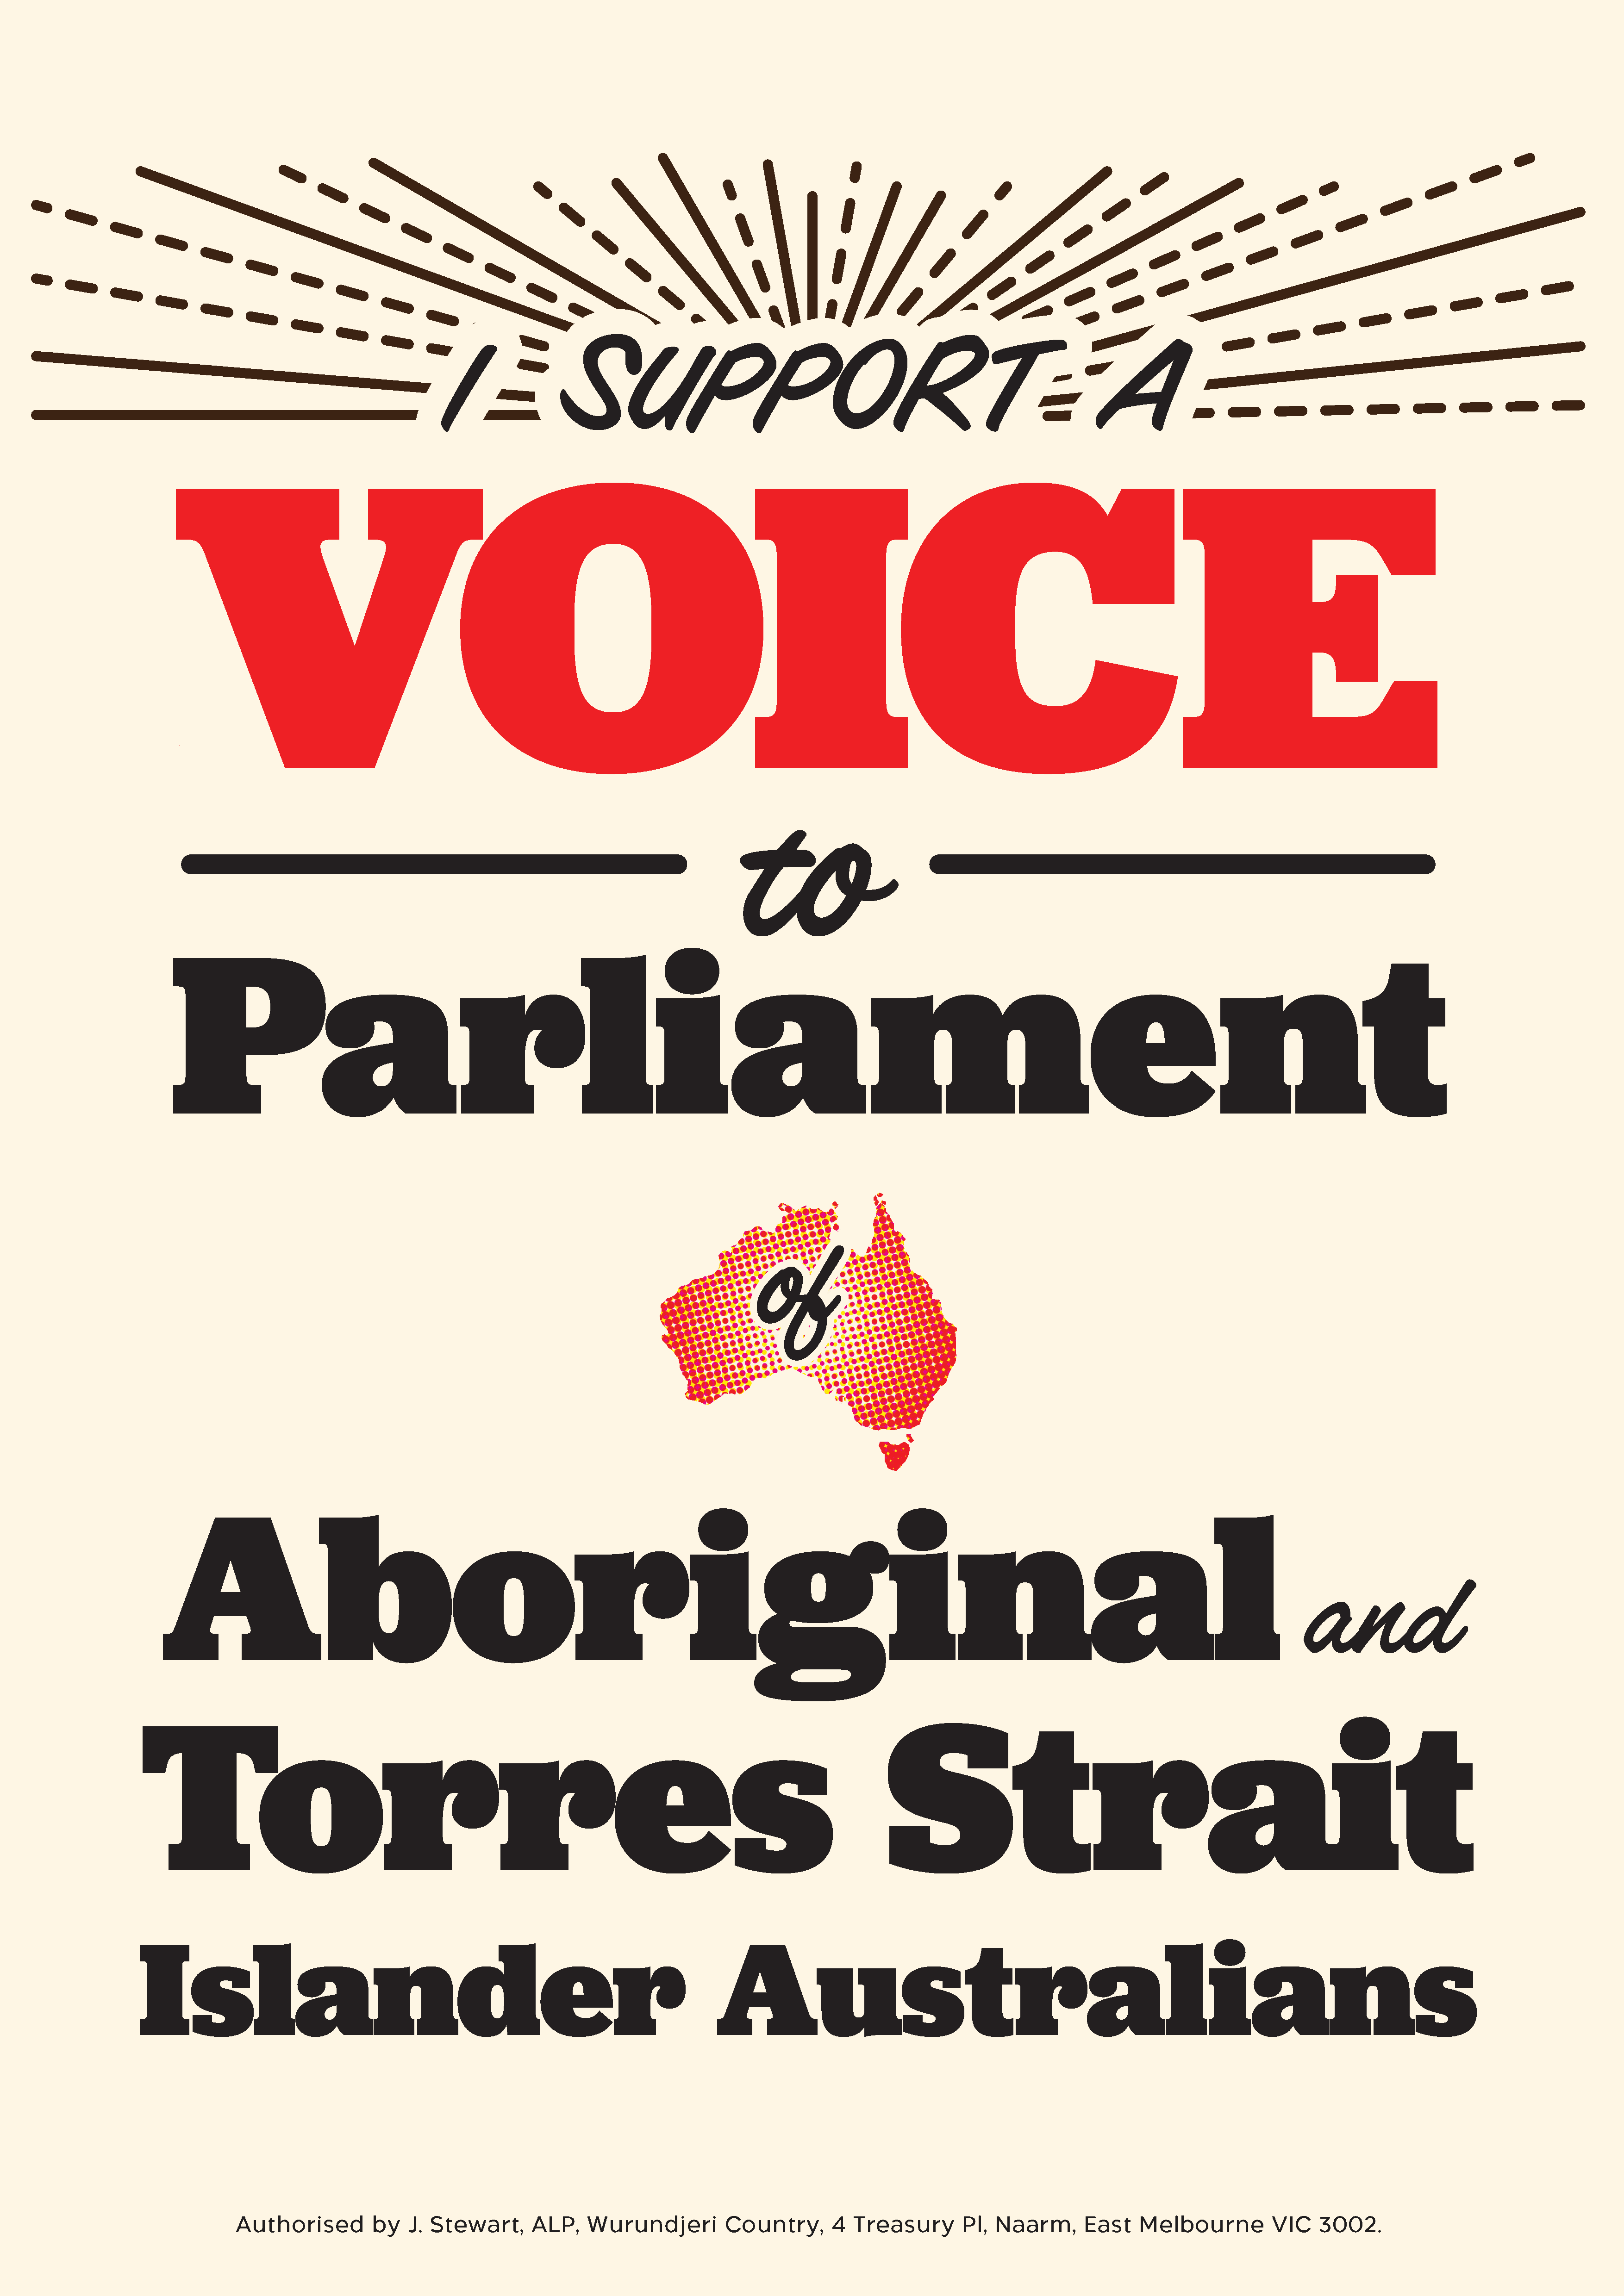 A3.15 - I Support a Voice to Parliament (ALP)